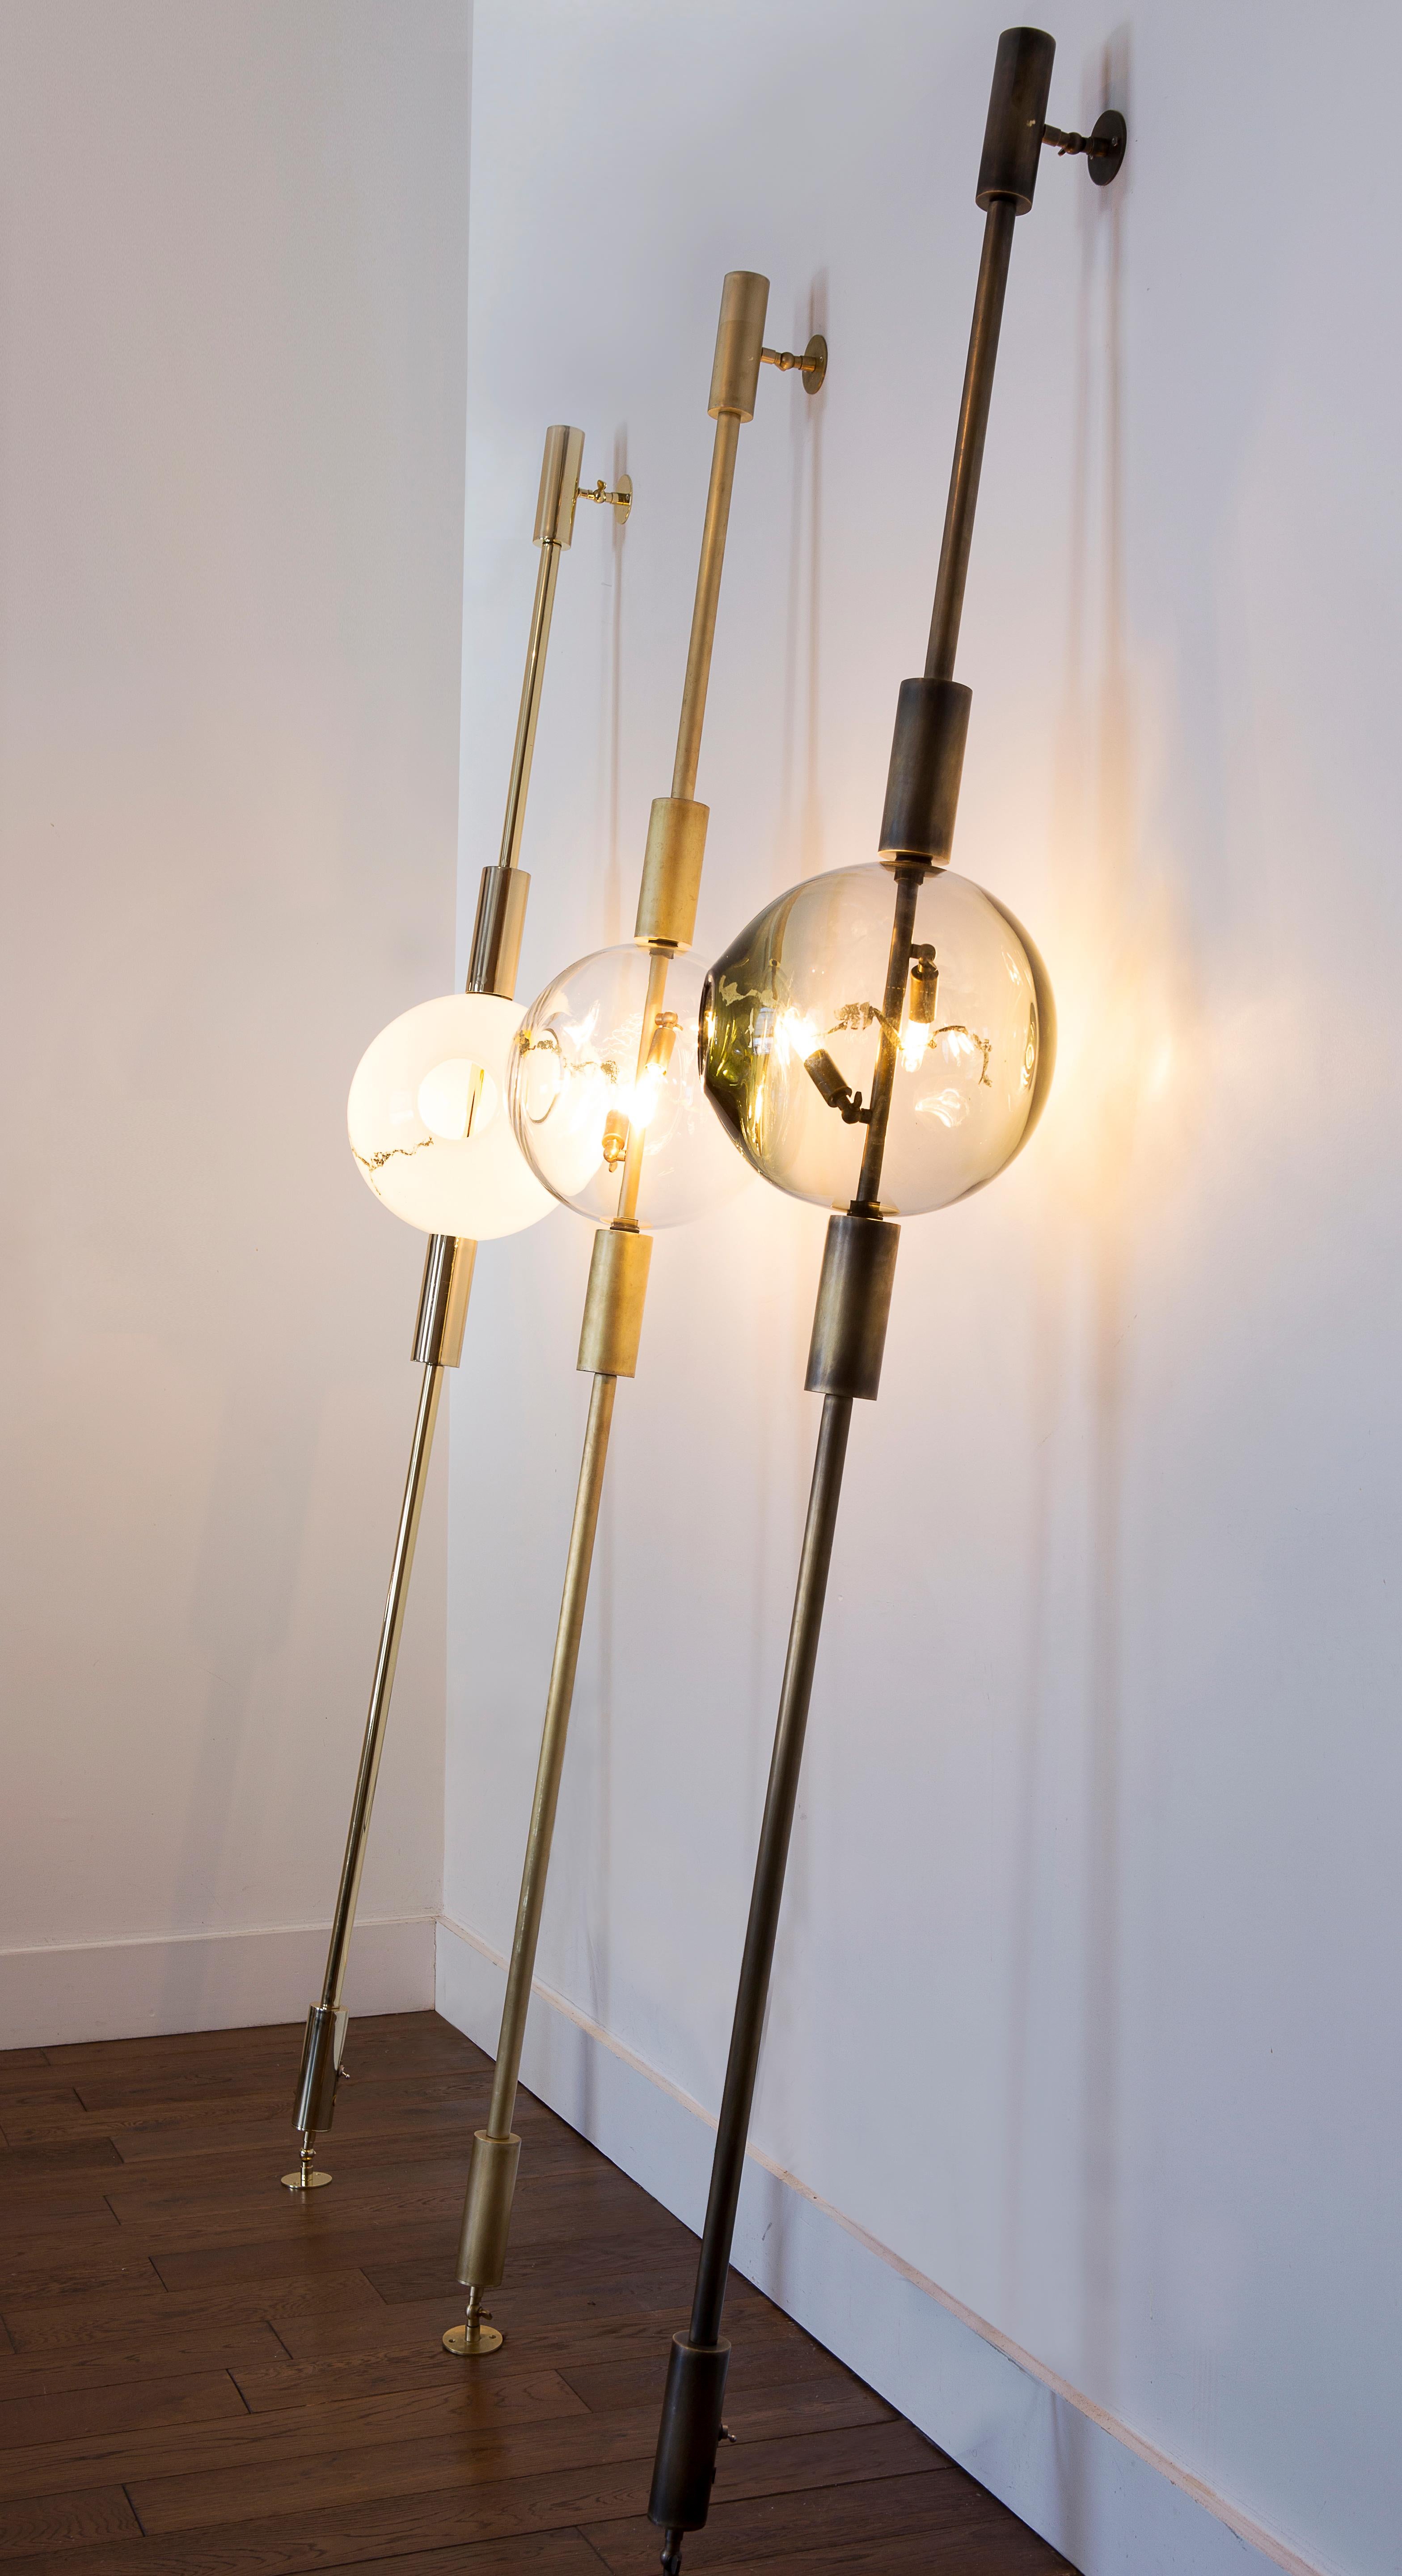 Unique lean light by Feyzstudio
Dimensions: W 30.4 x D 30.4 x H 213.3 cm
Materials: Brass, steel, glass.
Glass color, Metal fnish, dimensions can all be customized as our pieces are made-to-order.

FEYZ Studio is a New York based,